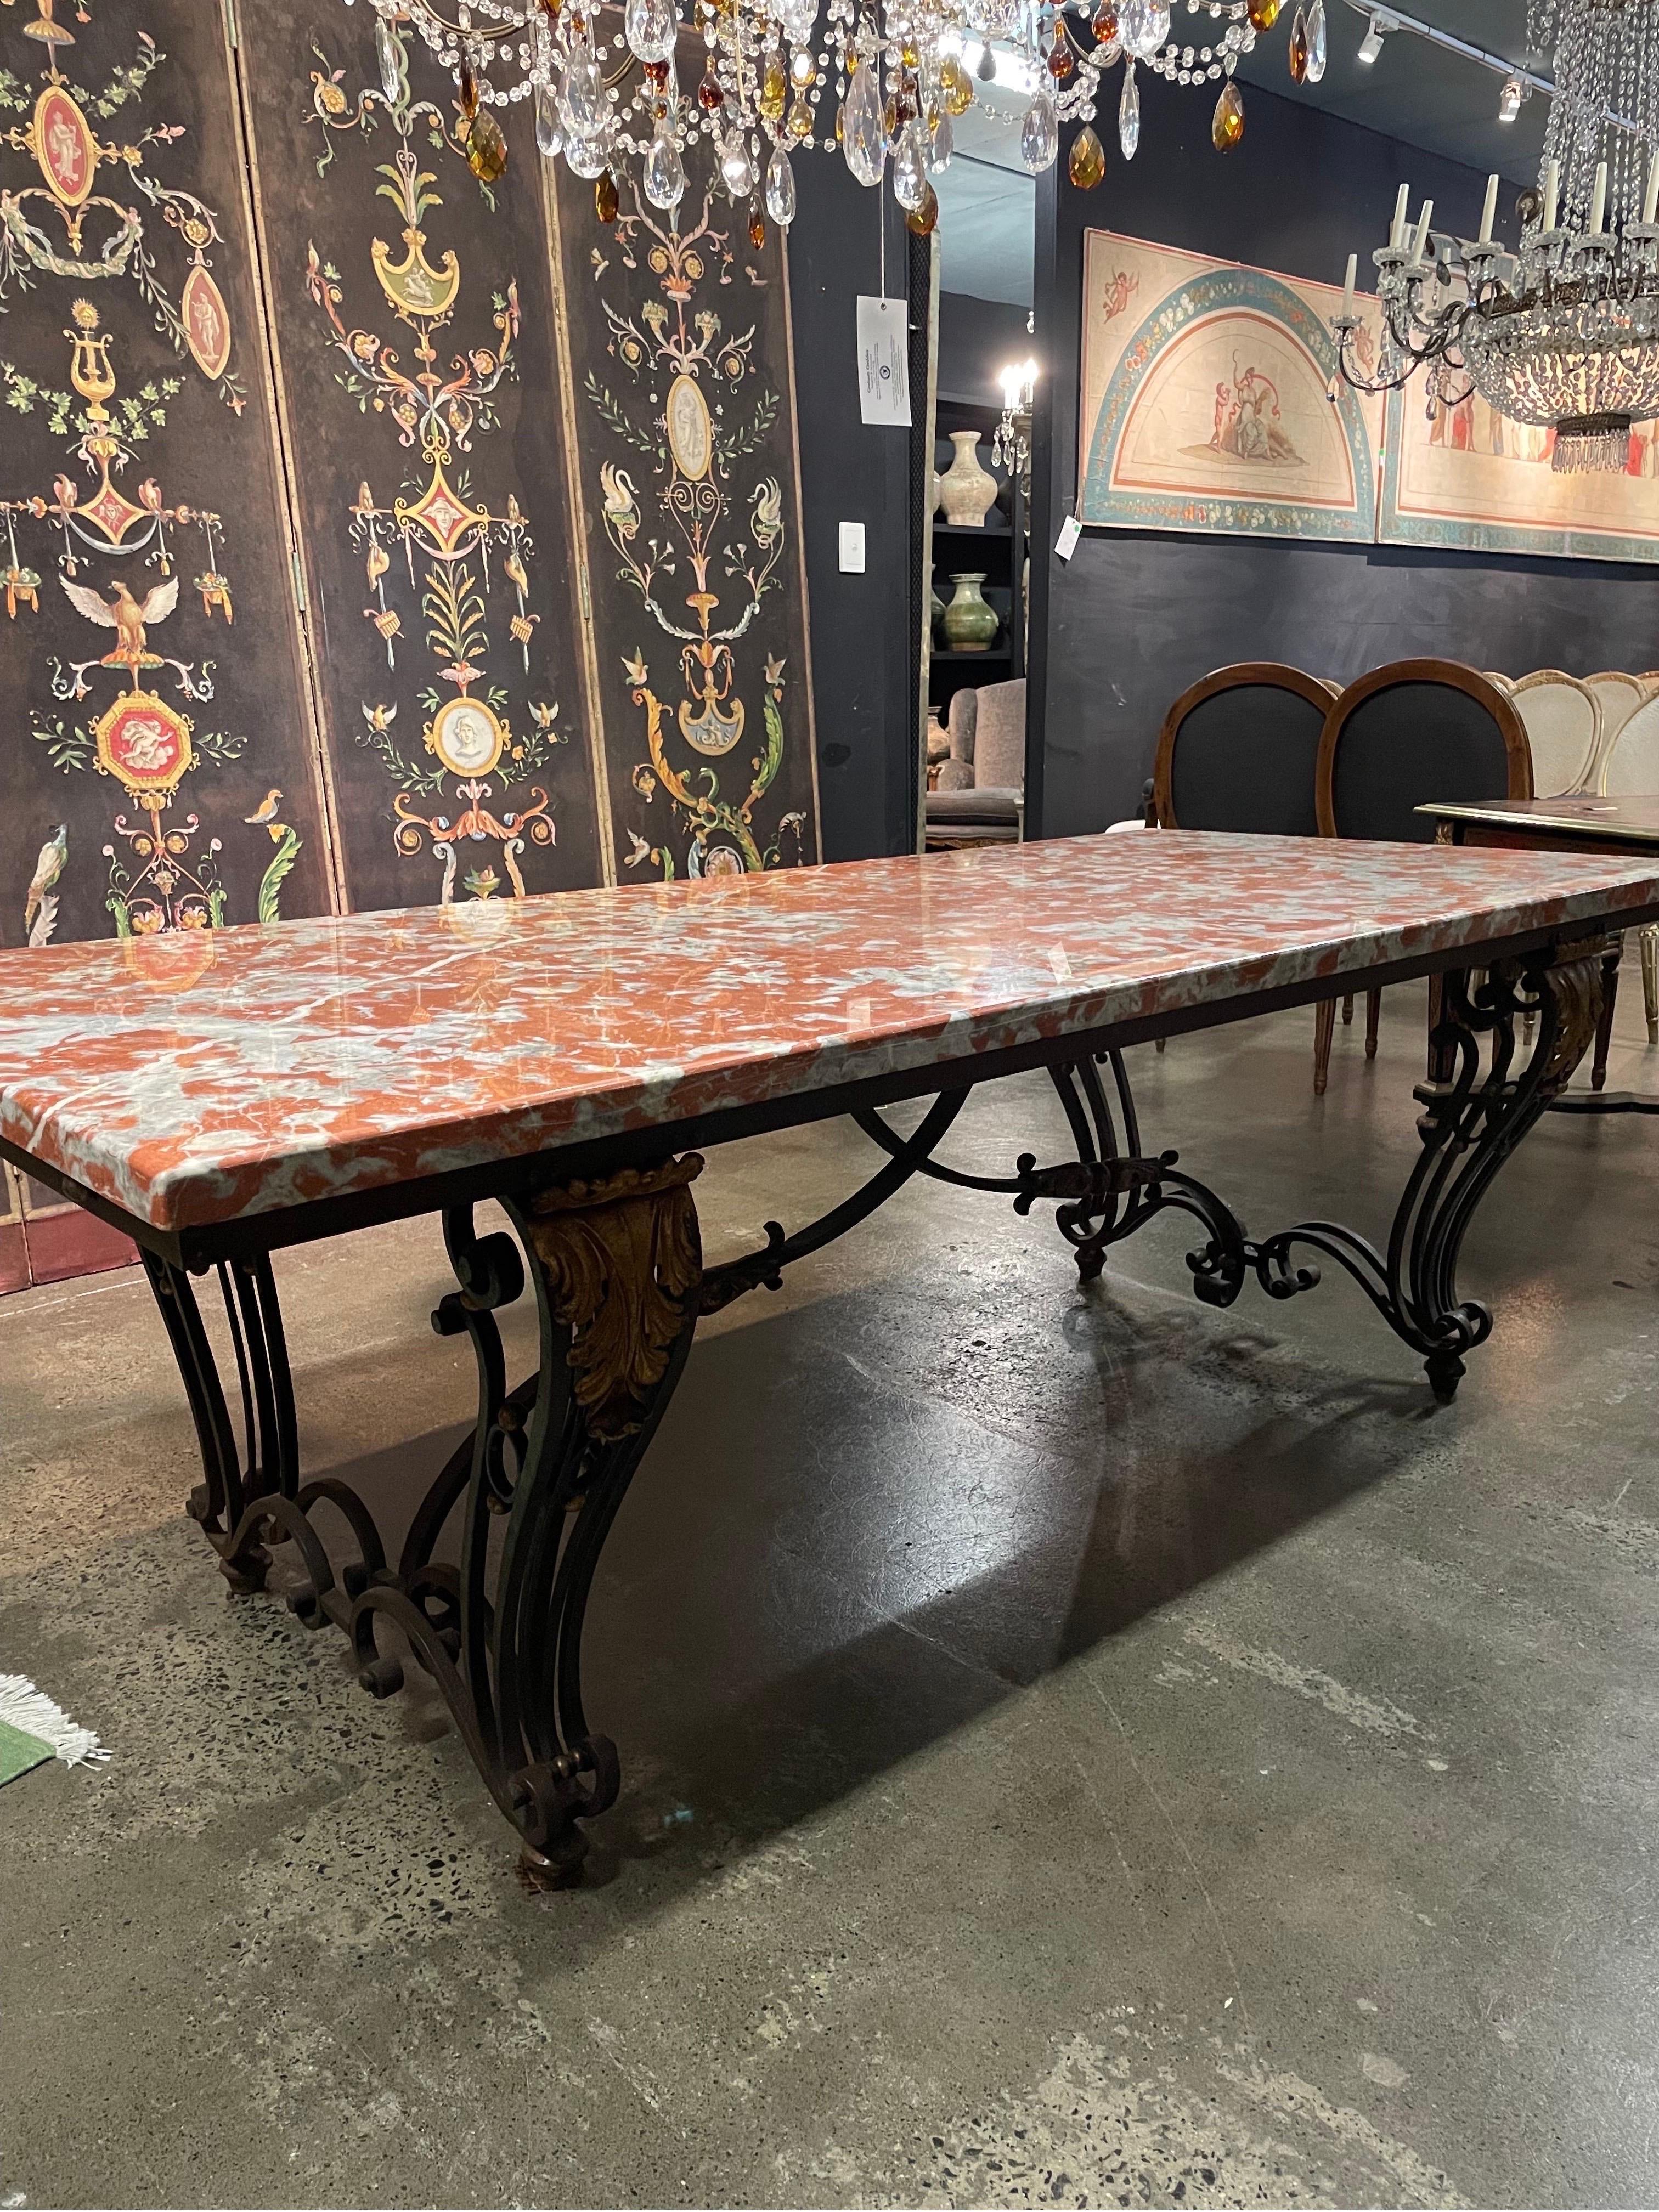 An Early 20th Century French Orange Marble-Top Table On Wrought Iron Base

The orange et gris marble top over wrought iron base with pair of cabriole scroll legs, each with gilt anthemion capital and double s-scroll stretchers joined by a central